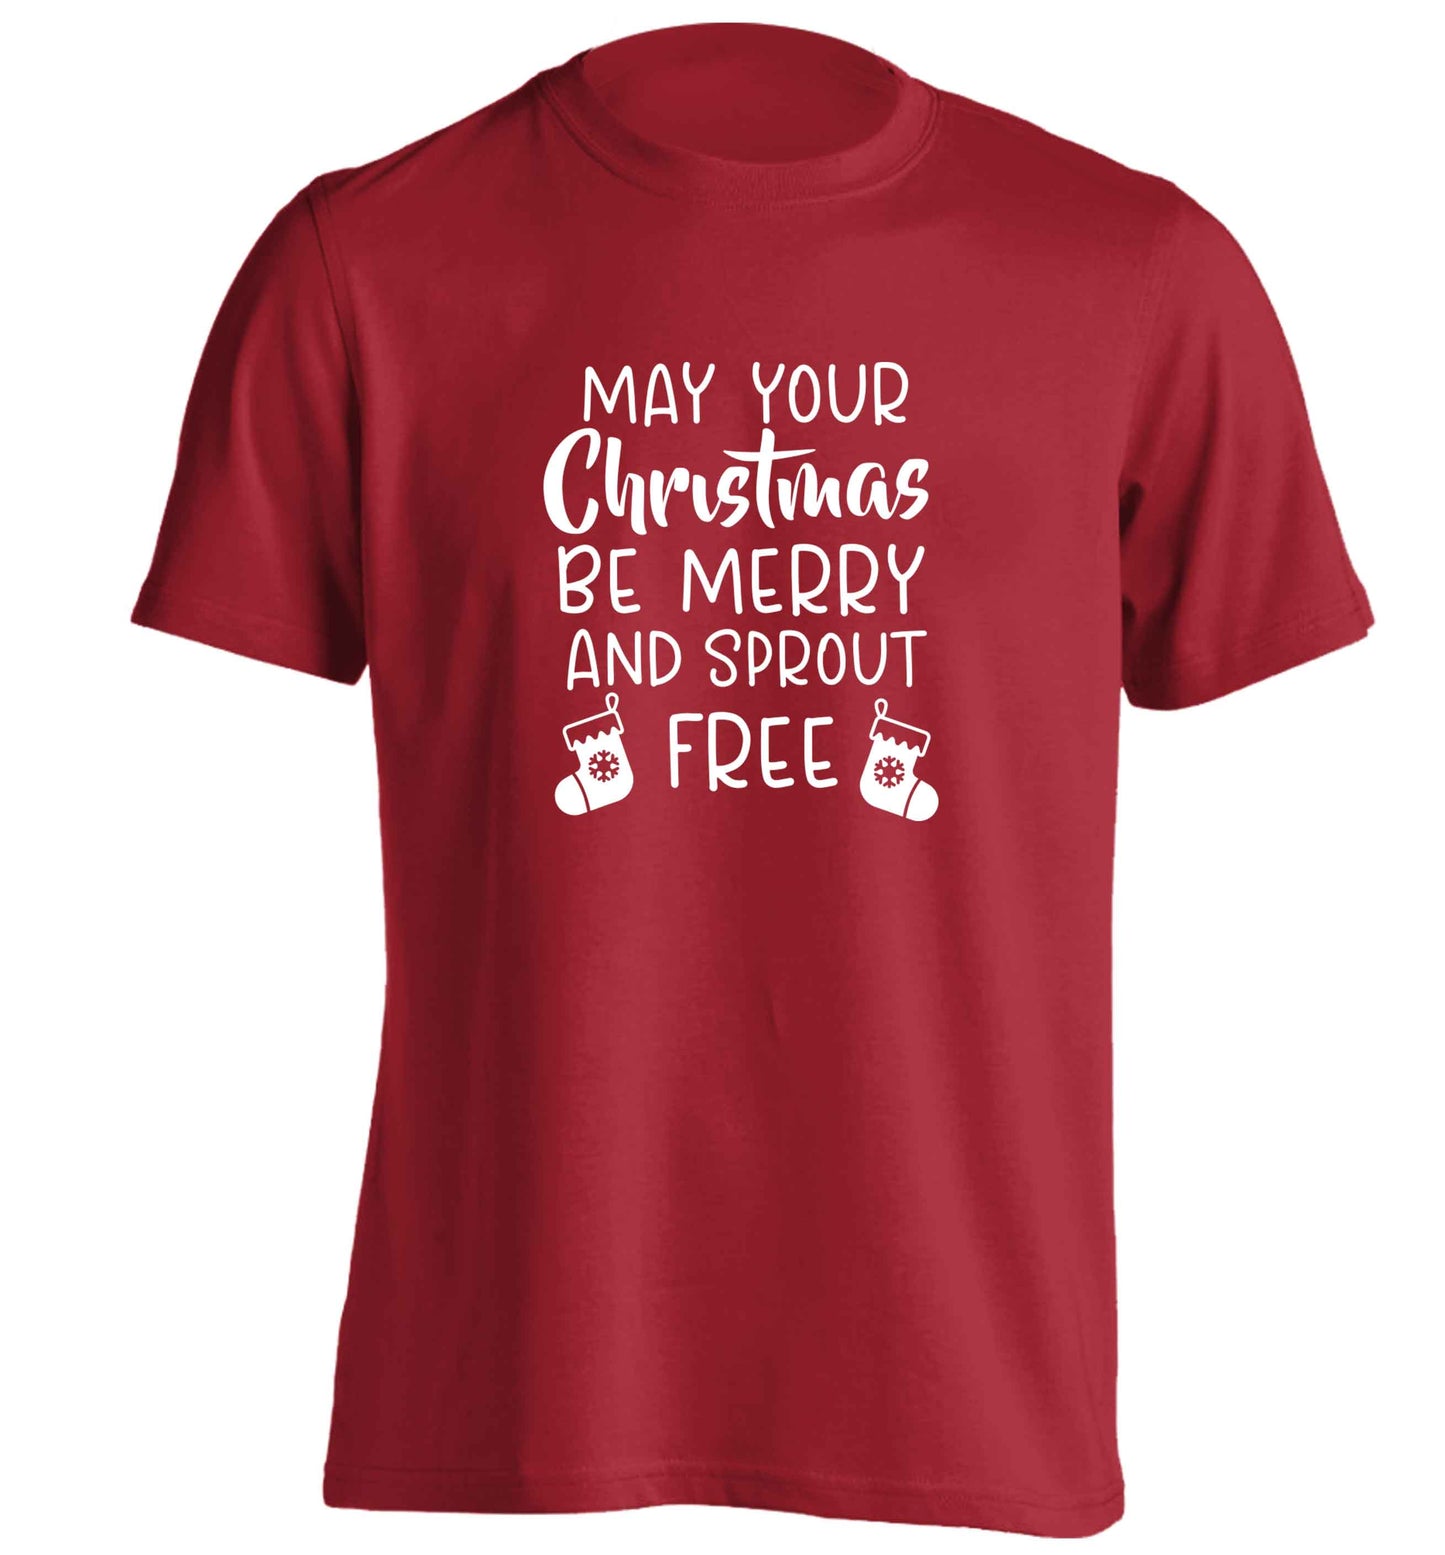 May your Christmas be merry and sprout free adults unisex red Tshirt 2XL